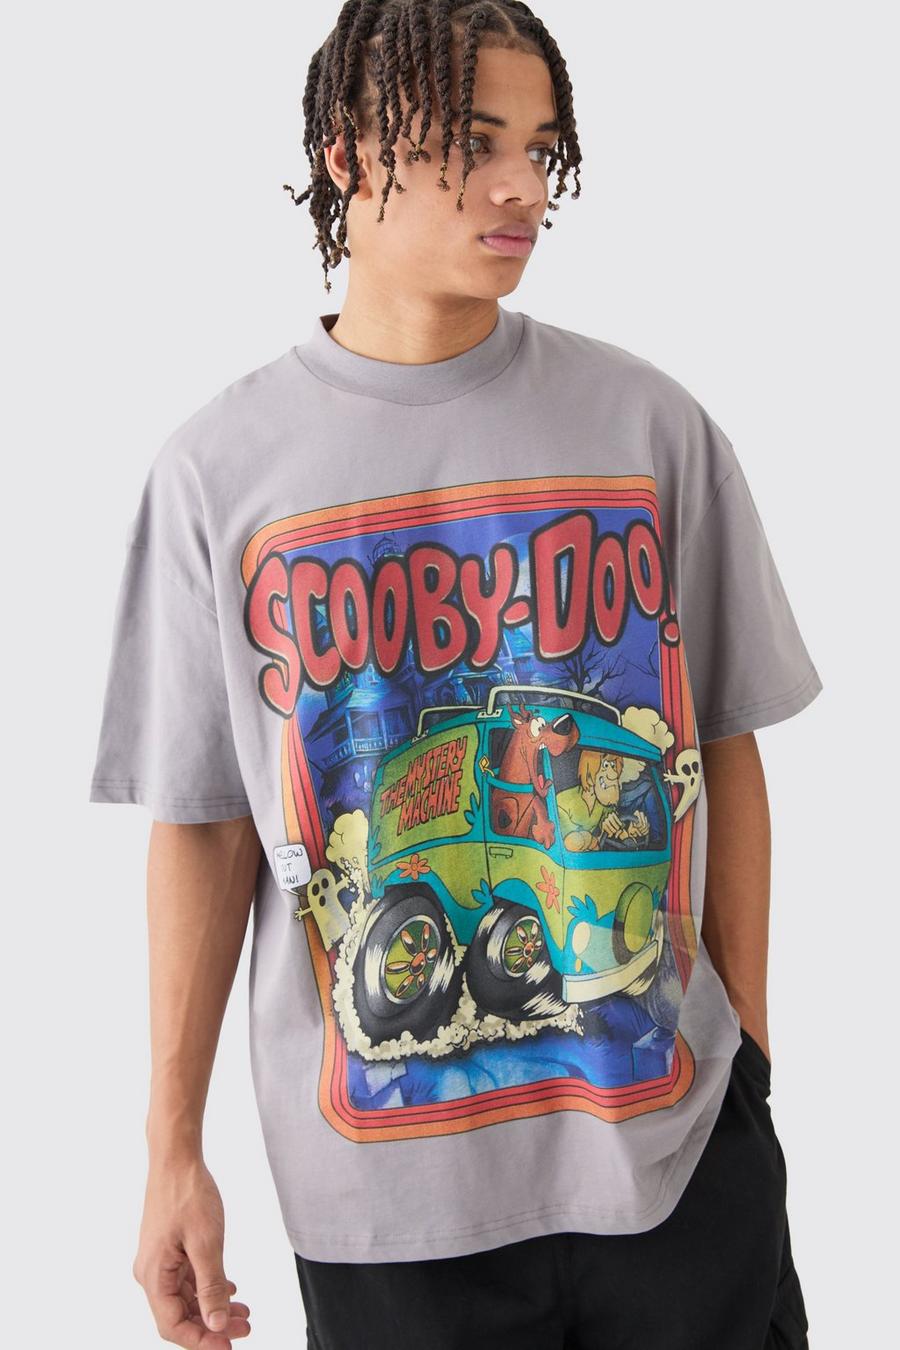 T-shirt oversize ufficiale di Scooby Doo in grande stile, Charcoal